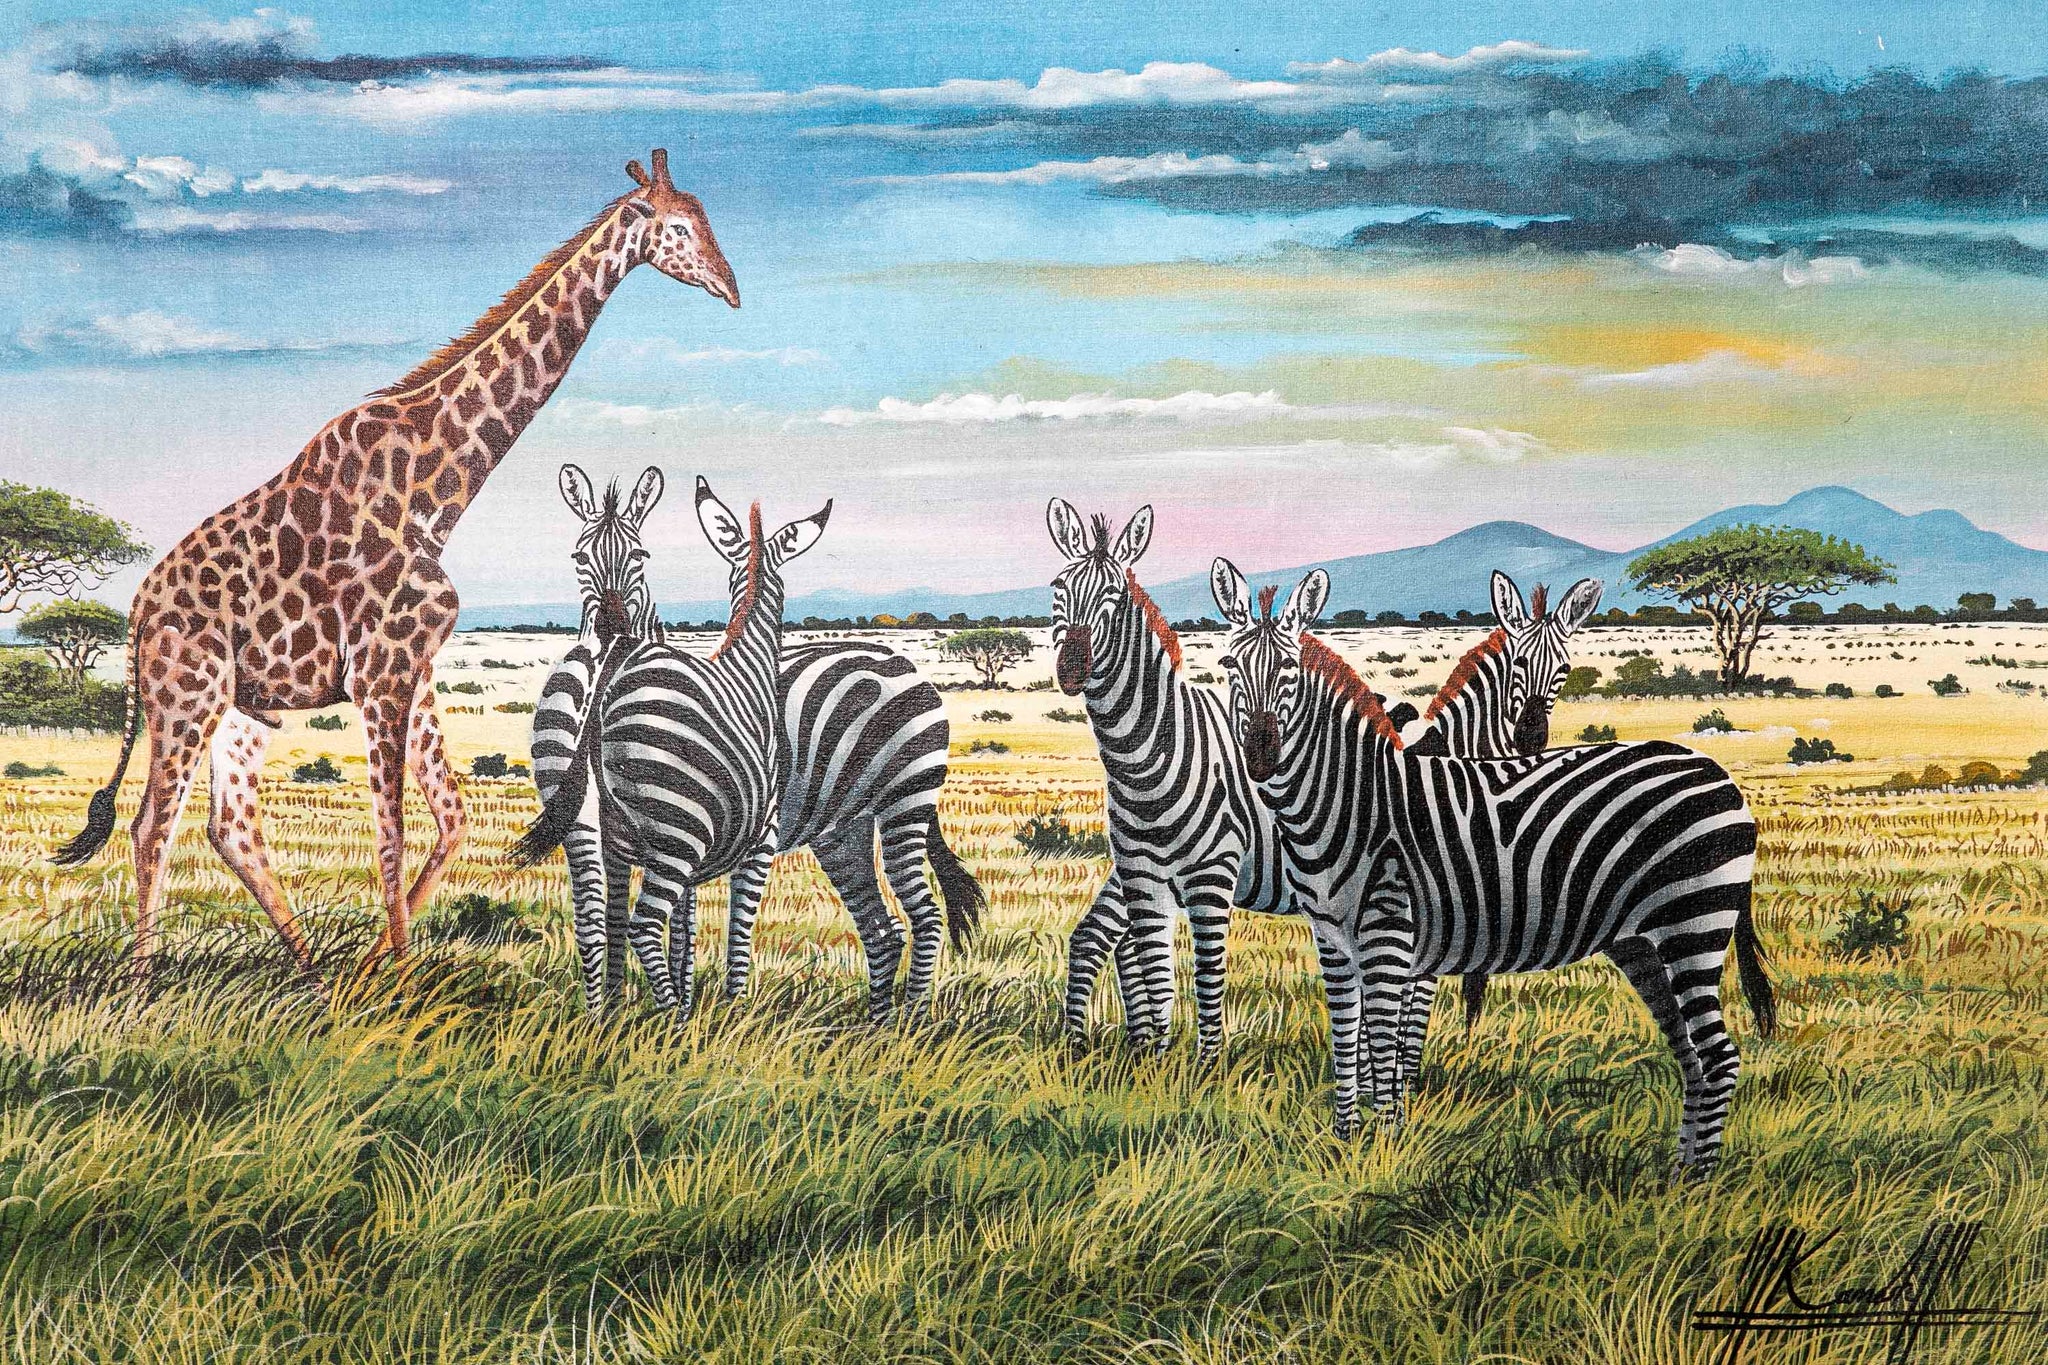 Giraffe and Zebra - Authentic African handicrafts | Clothing, bags, painting, toys & more - CULTURE HUB by Muthoni Unchained